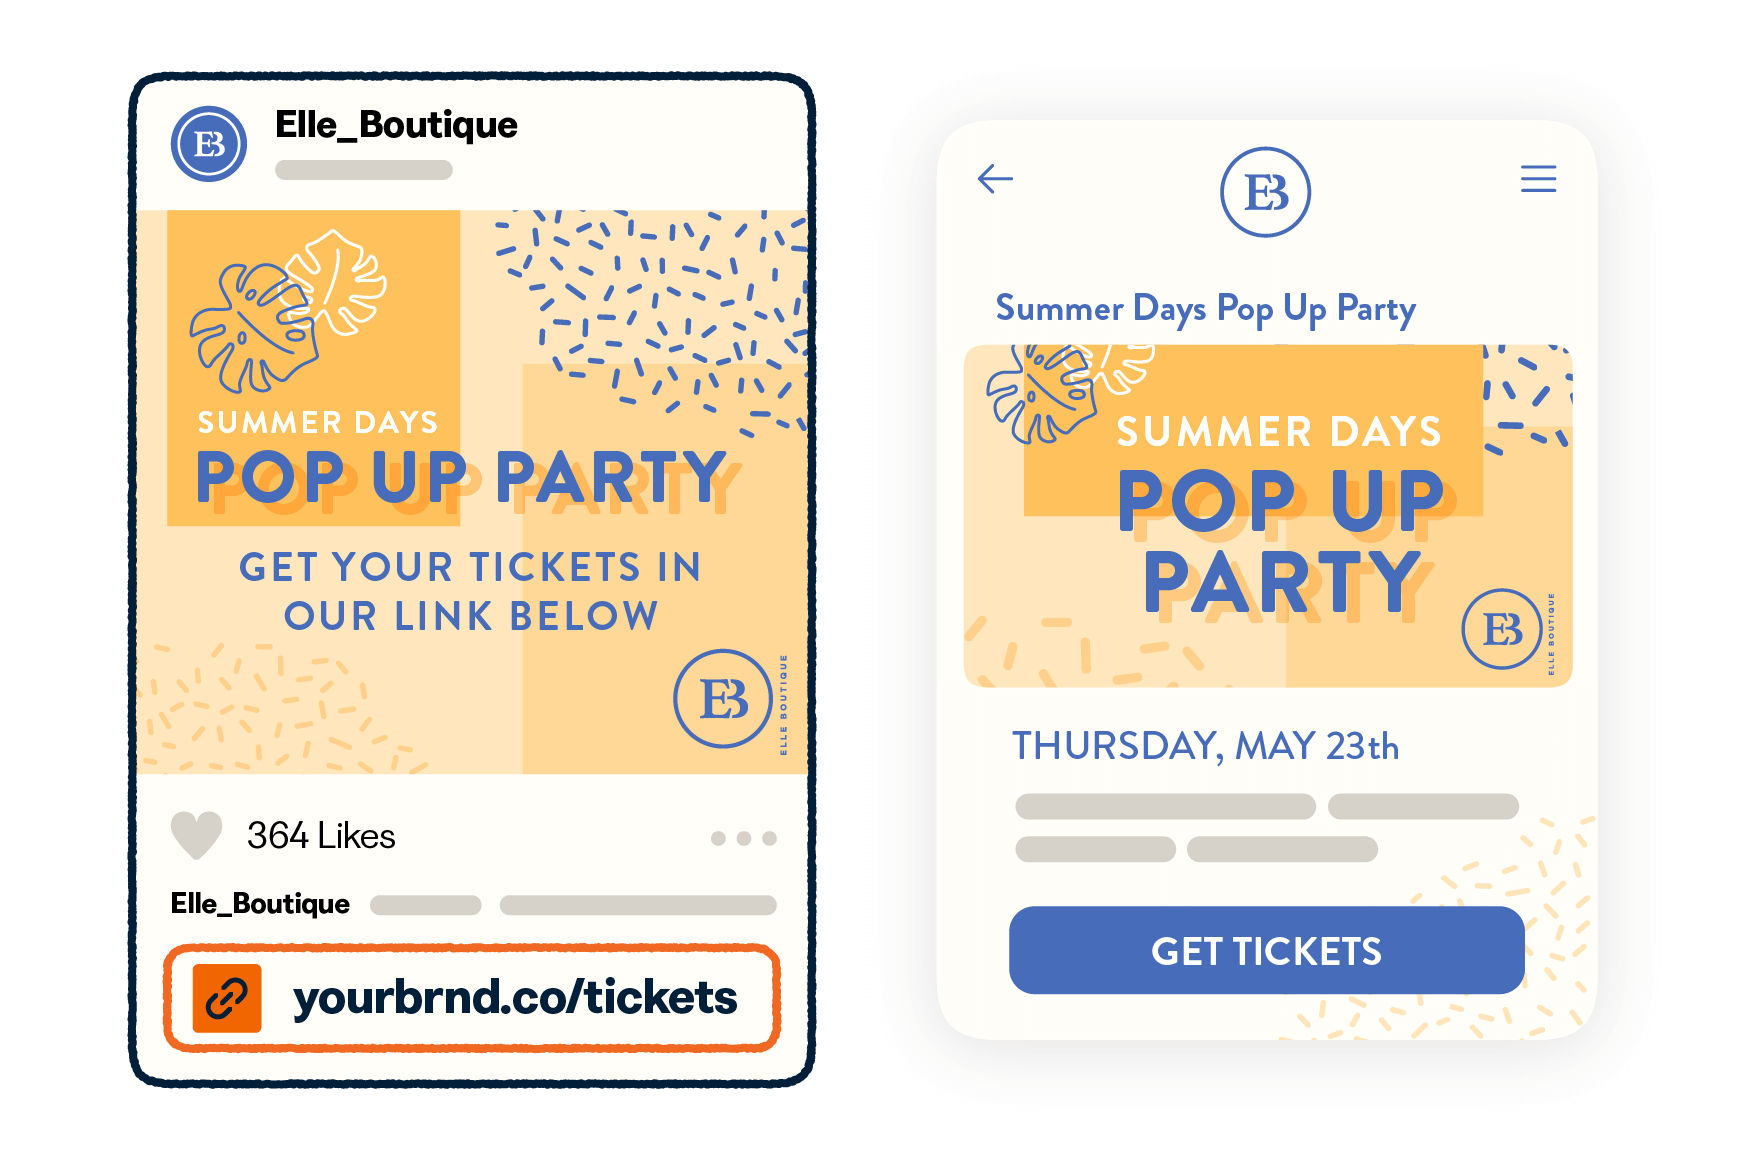 Bitly short link example for tickets to a party